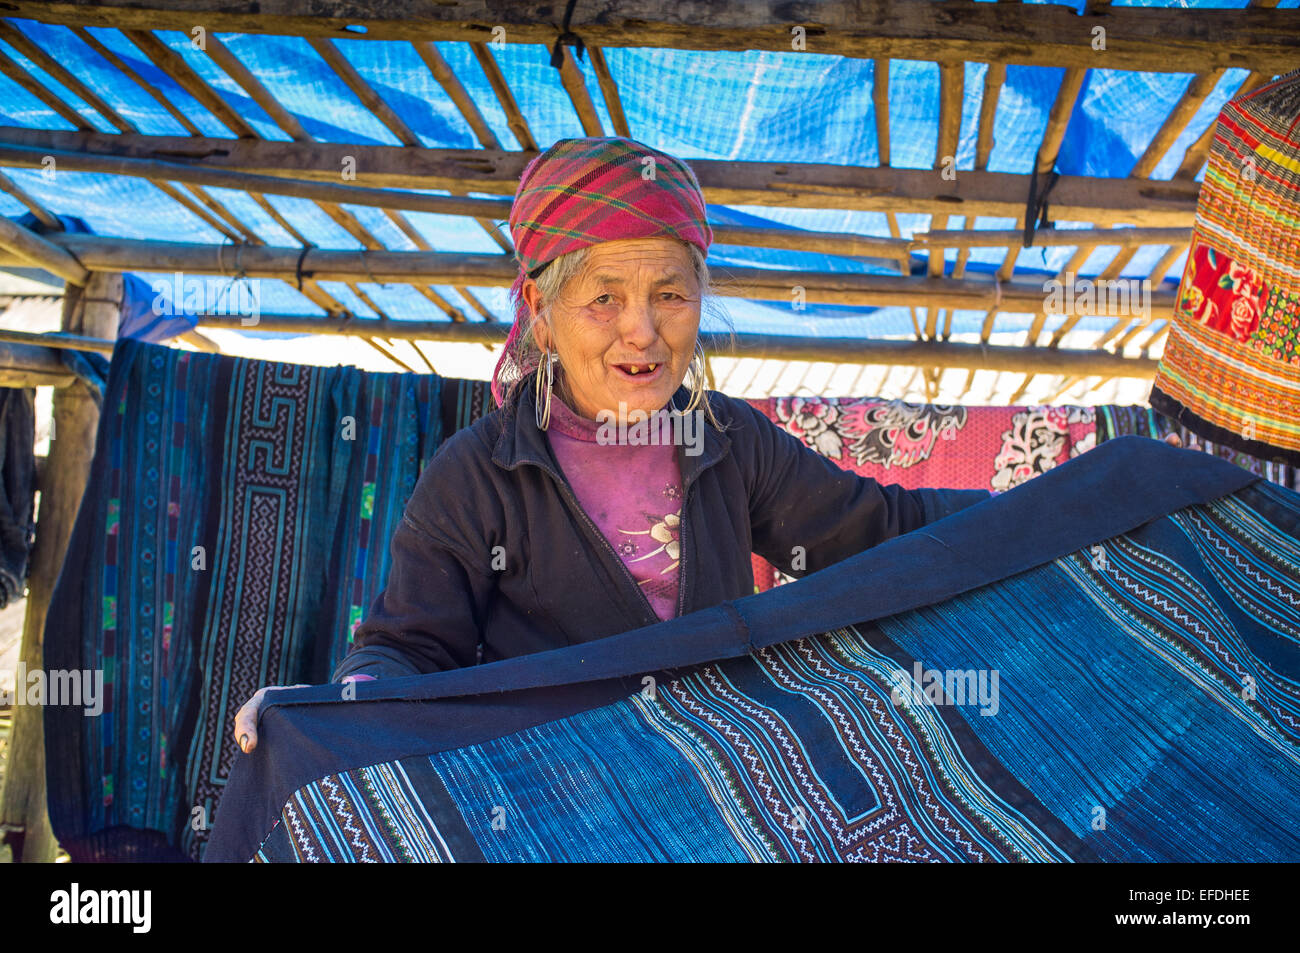 Hmong woman with indigo clothes on sale, Sapa hill tribe region, Northern Vietnam, Asia Stock Photo